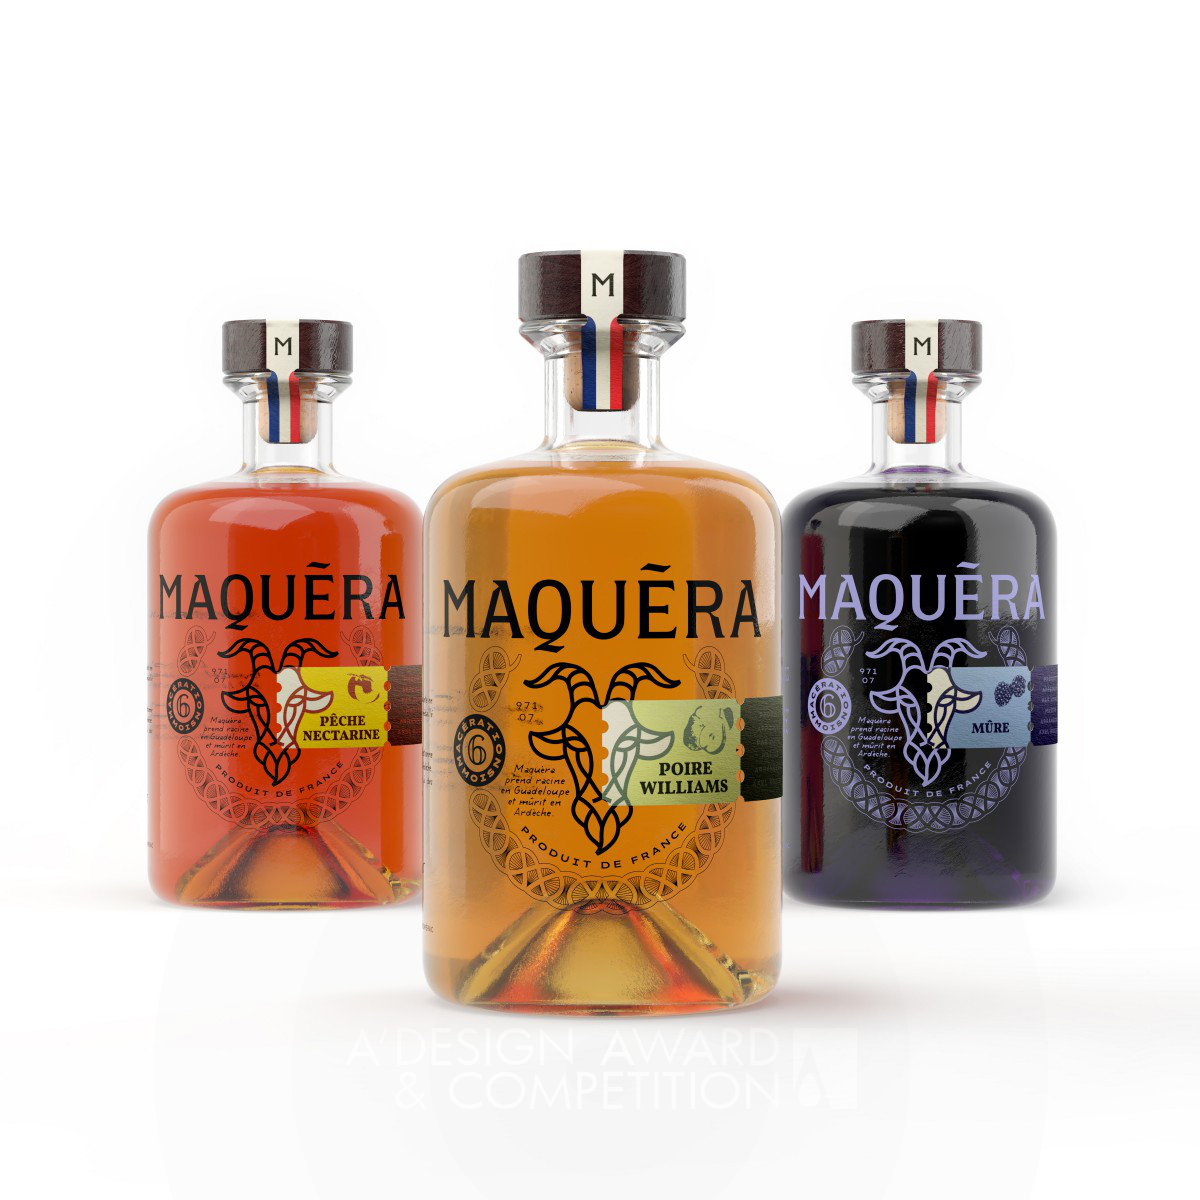 Tiravy Guillaume wins Silver at the prestigious A' Packaging Design Award with Maquera 50cl Infused Liquor Bottle.